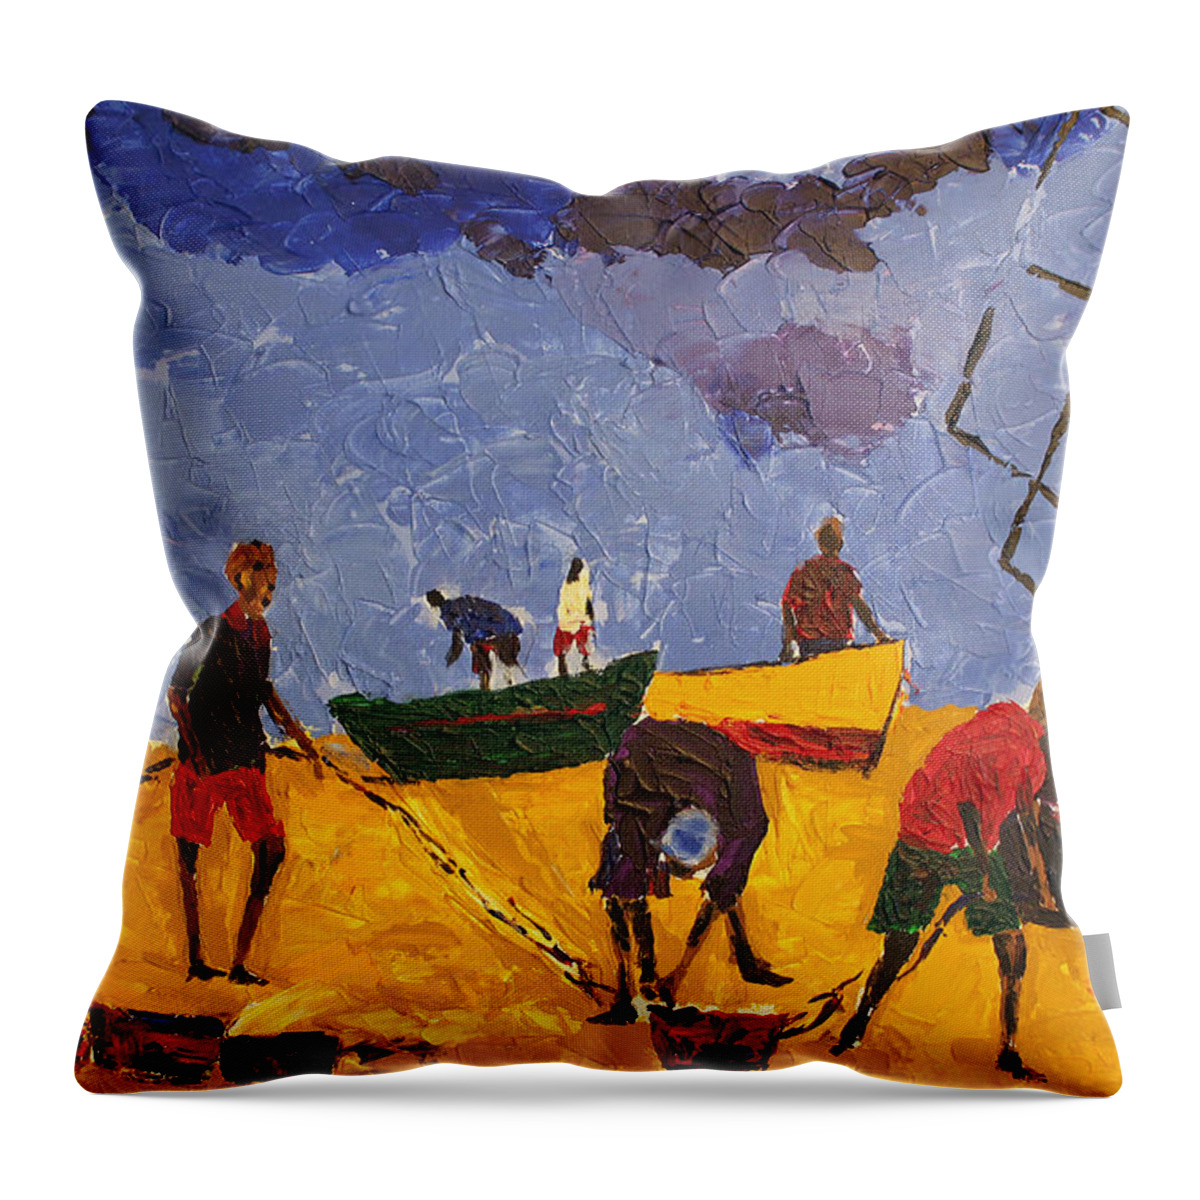 African Art Throw Pillow featuring the painting Preparing For The Catch by Tarizai Munsvhenga